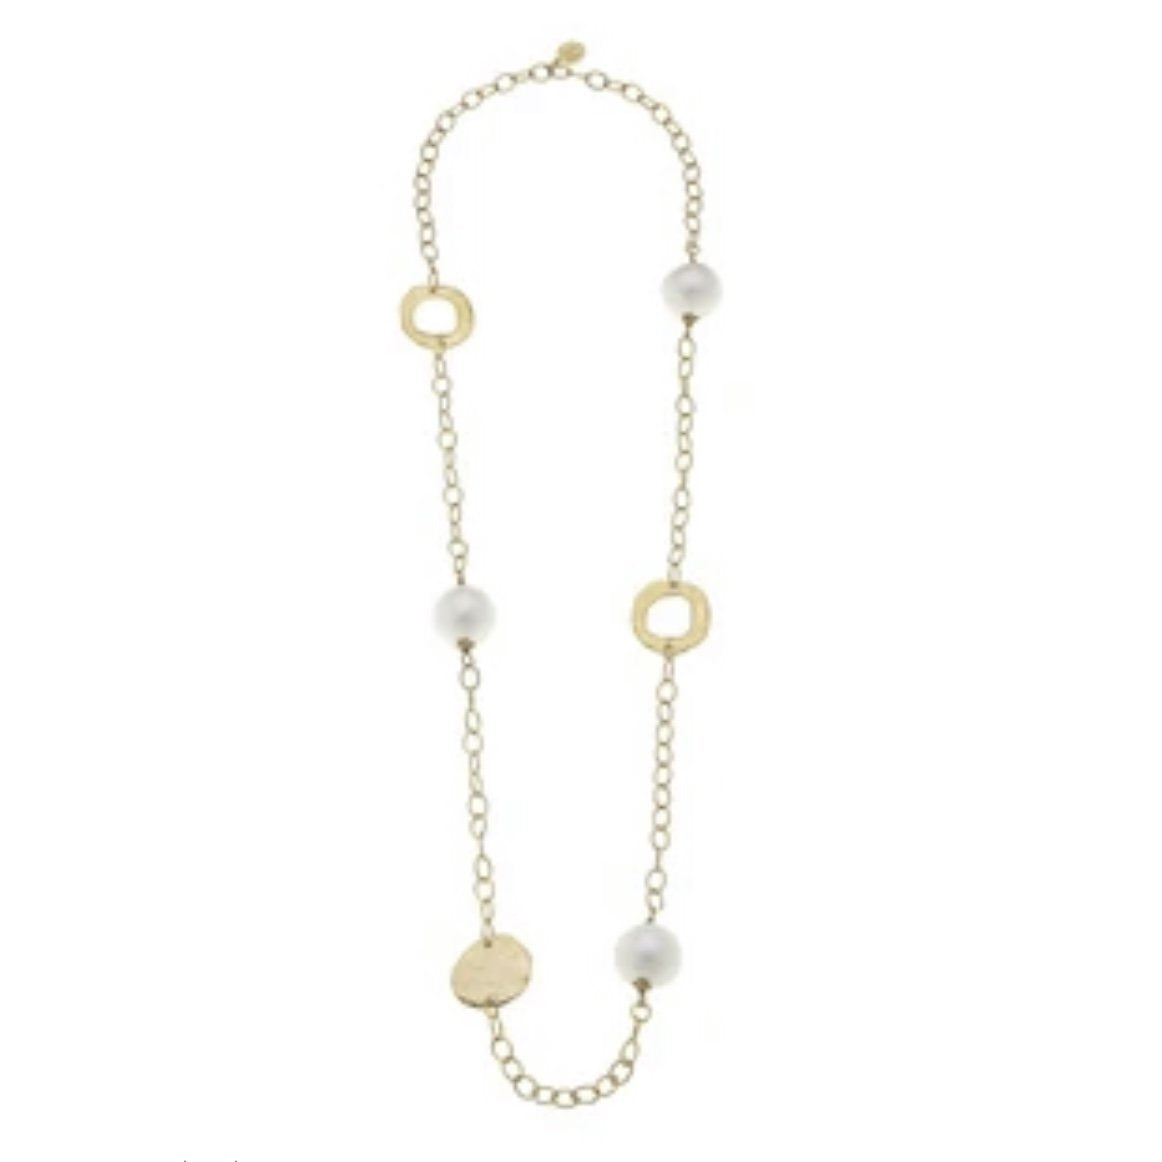 Susan Shaw Circle + Cotton Pearl Chain Necklace in Gold & Silver